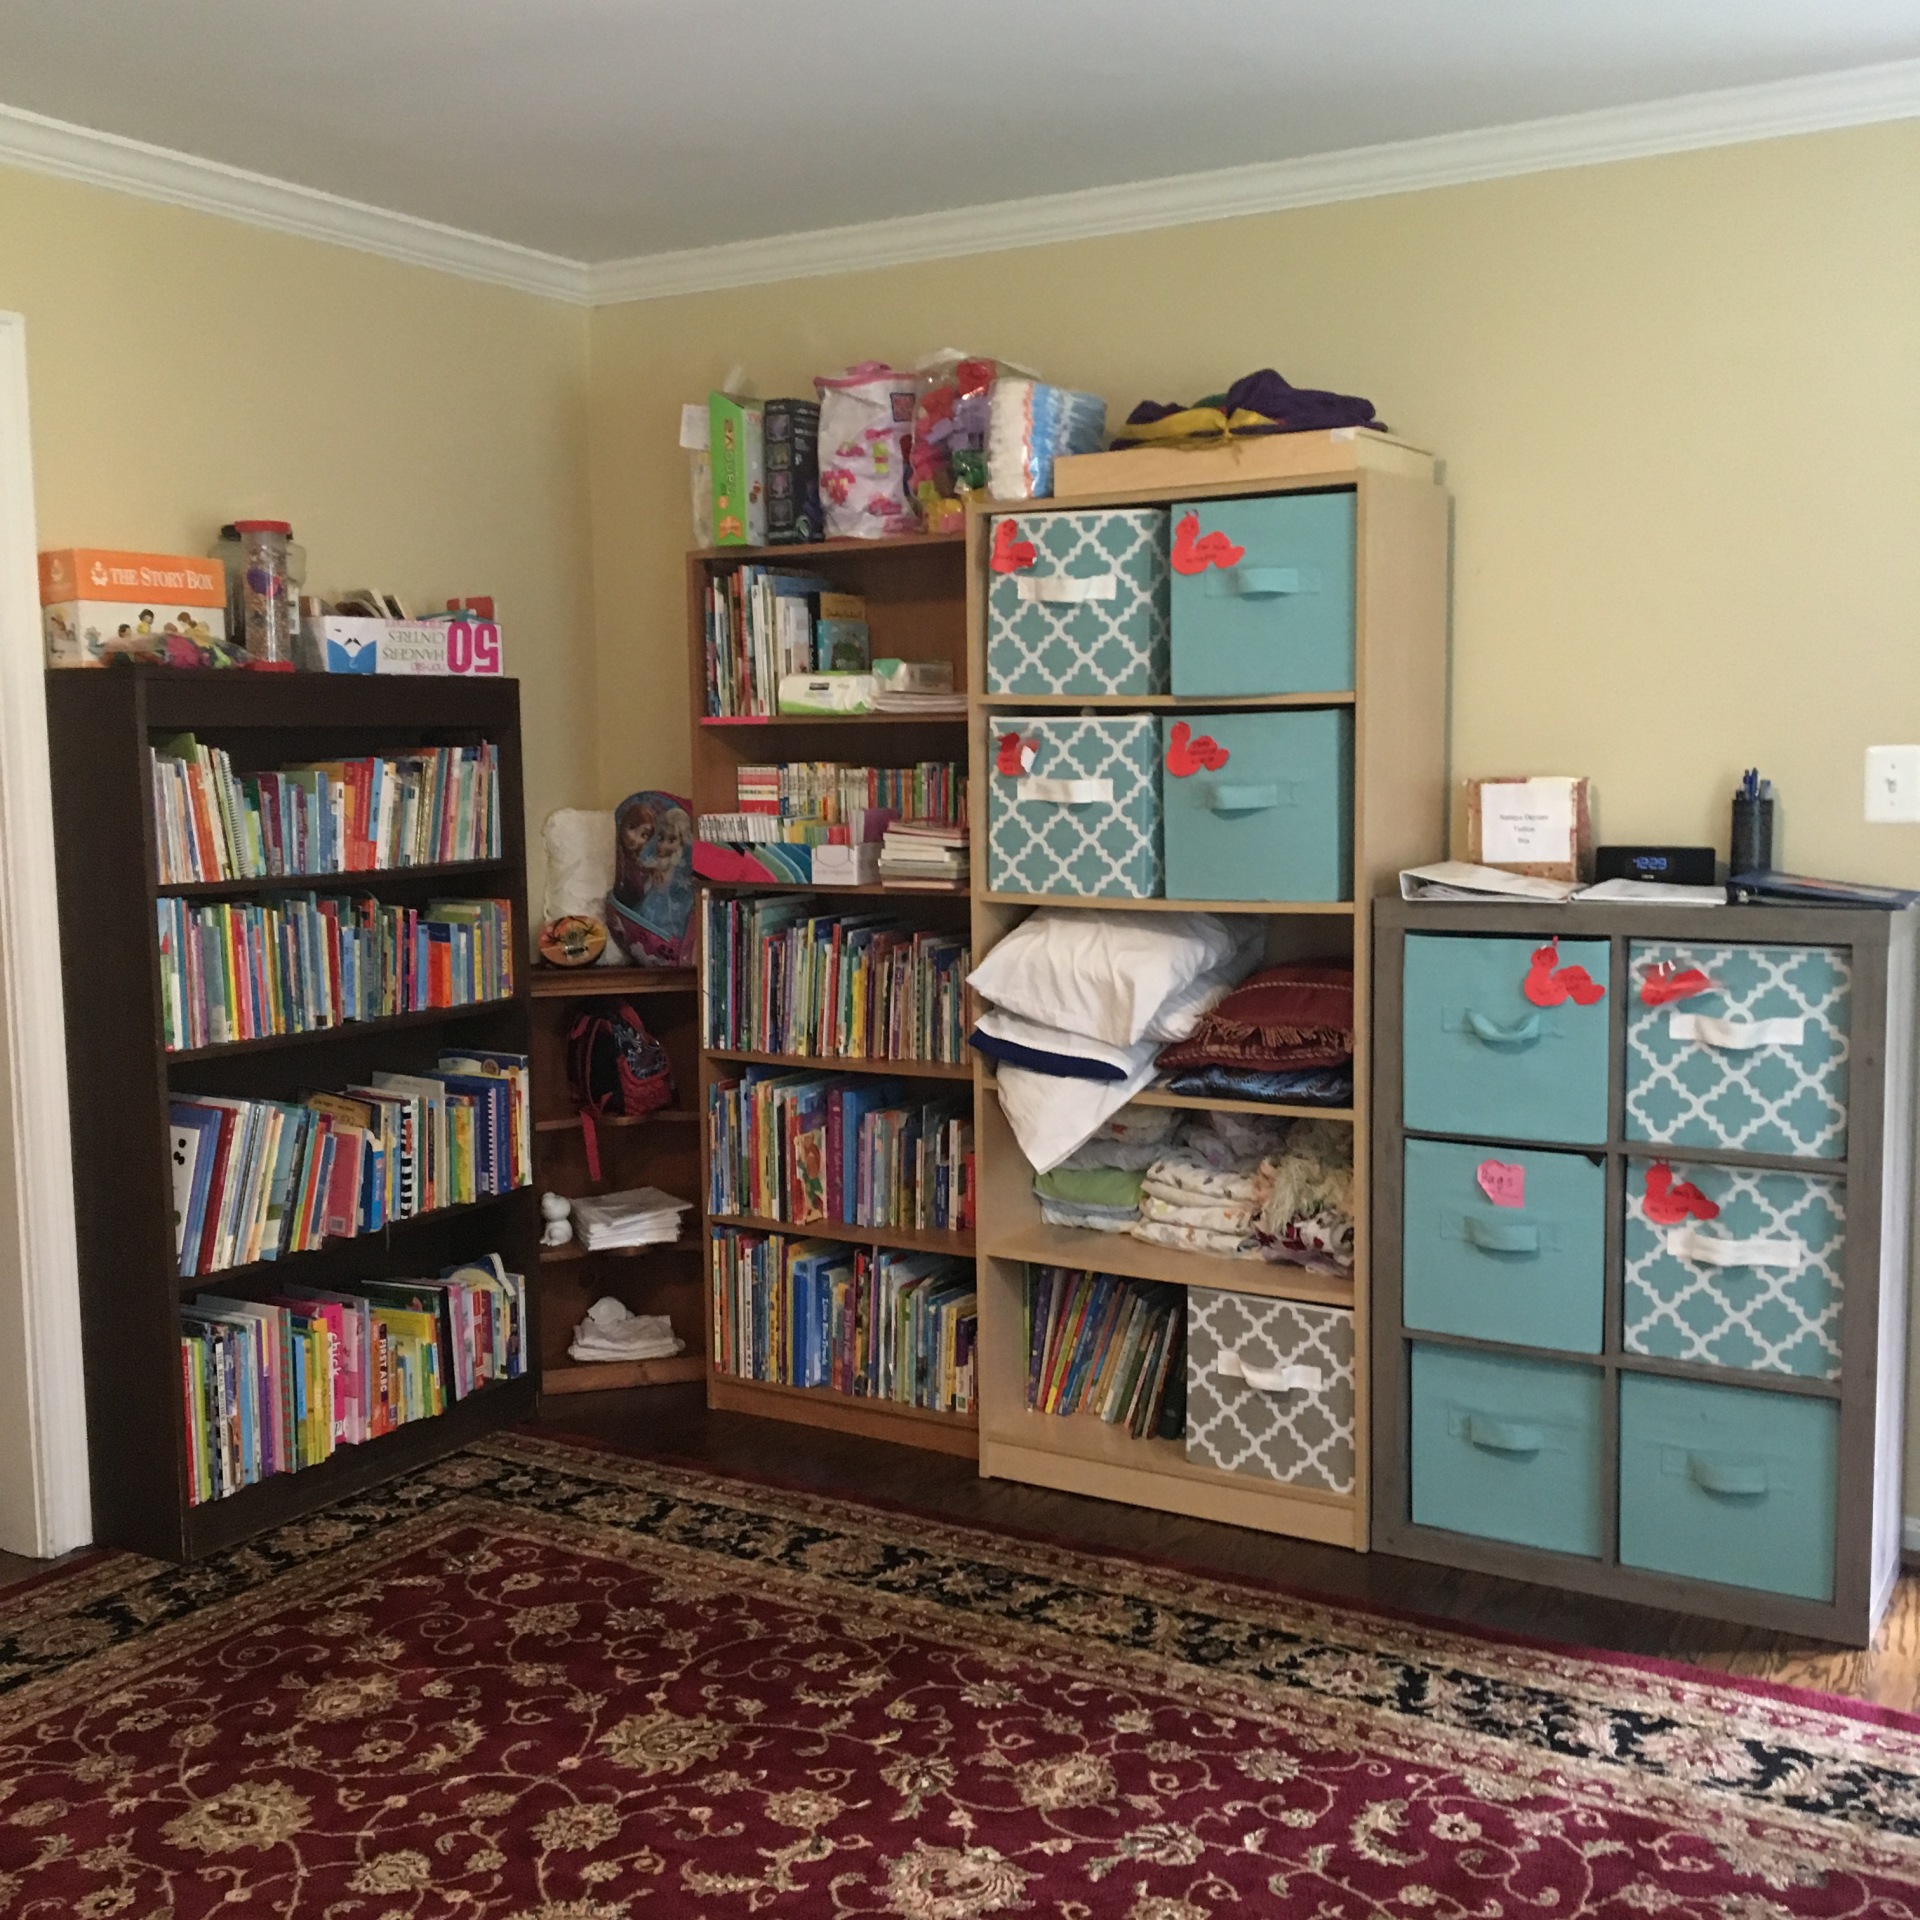 Book corner and each child's personal belonging